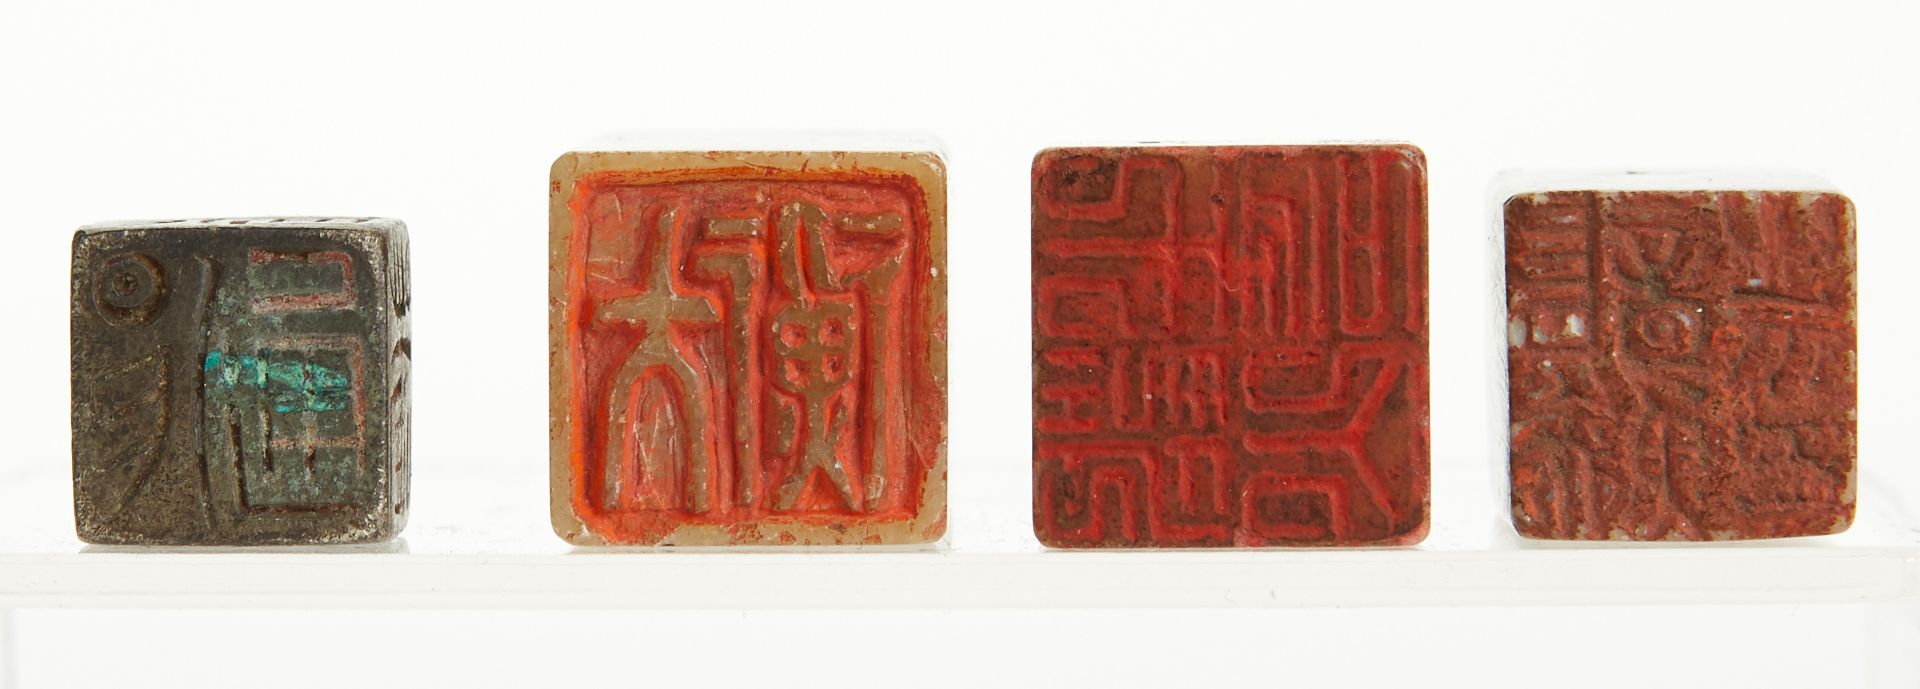 Grp: 10 Antique Chinese Seals - Image 3 of 11